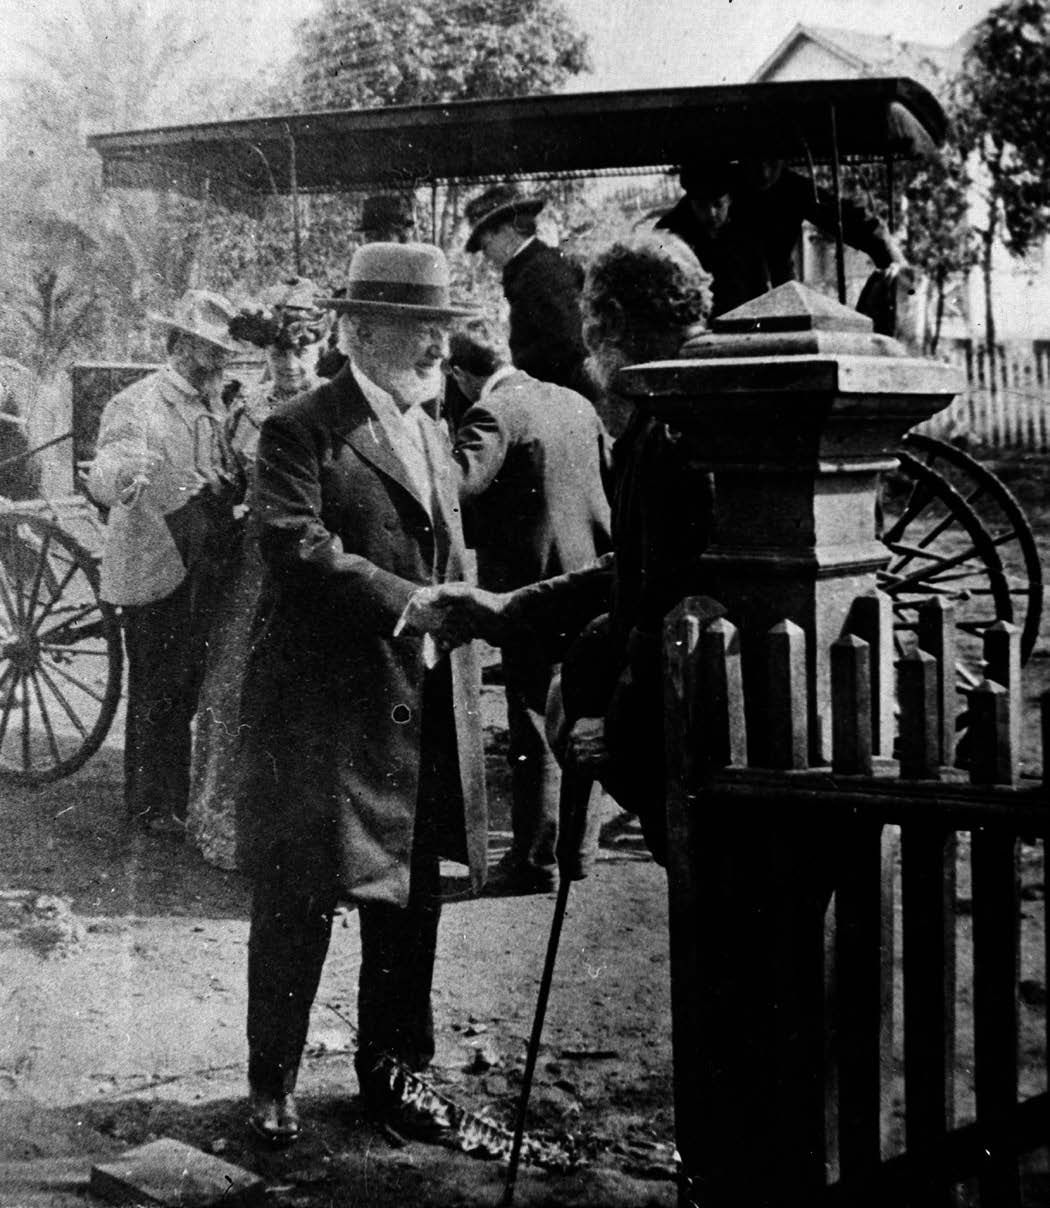 George Q. Cannon, First Counselor in the First Presidency, greets Church members in Honolulu in 1900. Among the first missionaries in the Hawaiian Islands, Cannon lauded the Saints’ faithful longevity. Courtesy of the William R. Bradford family.